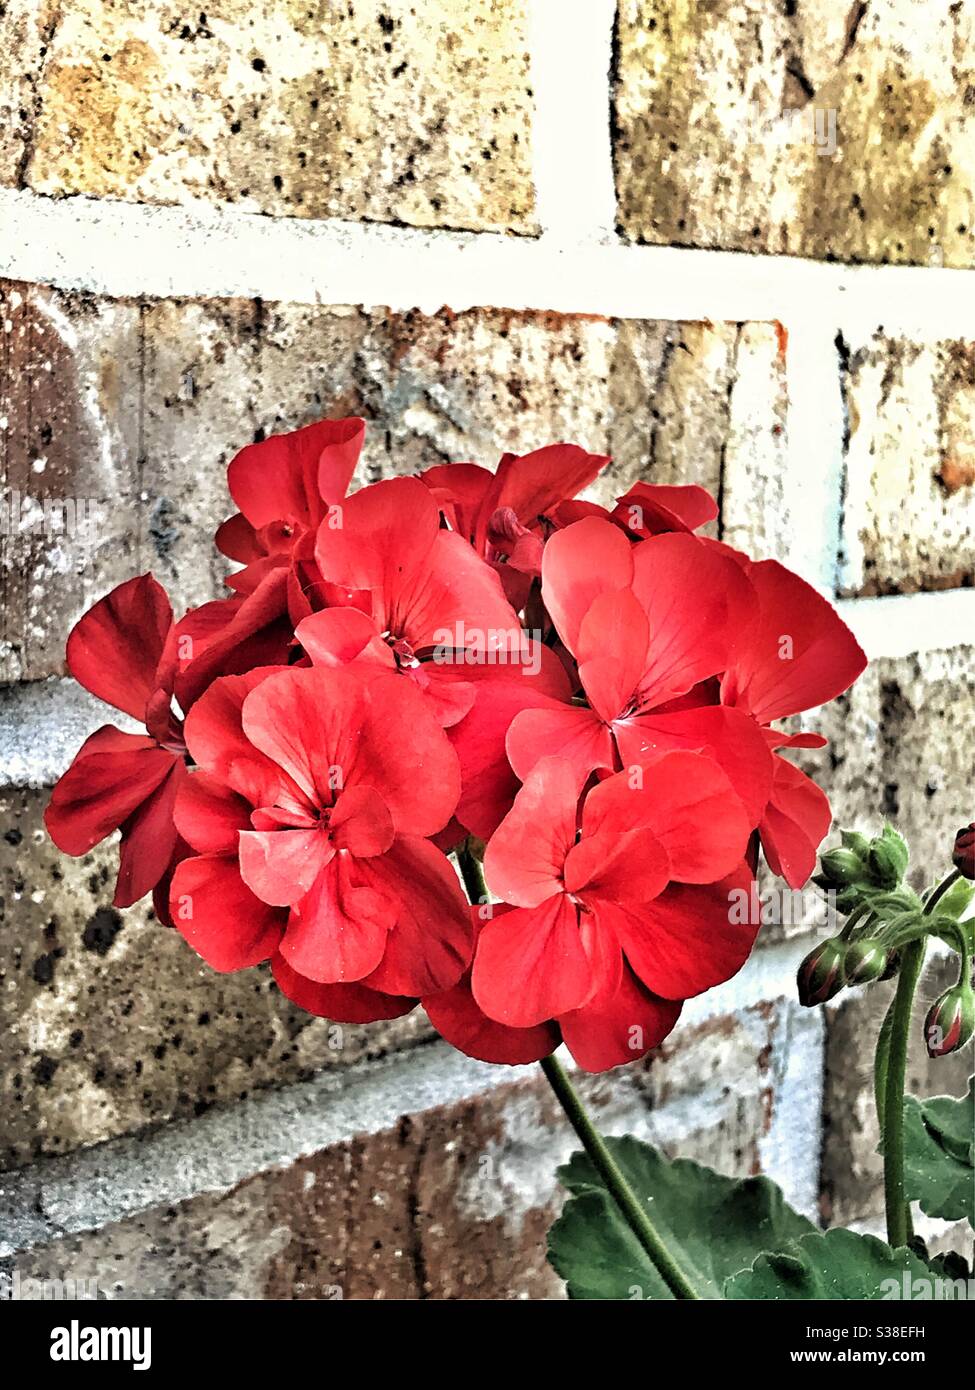 Red Geranium blooming against a brick wall Stock Photo